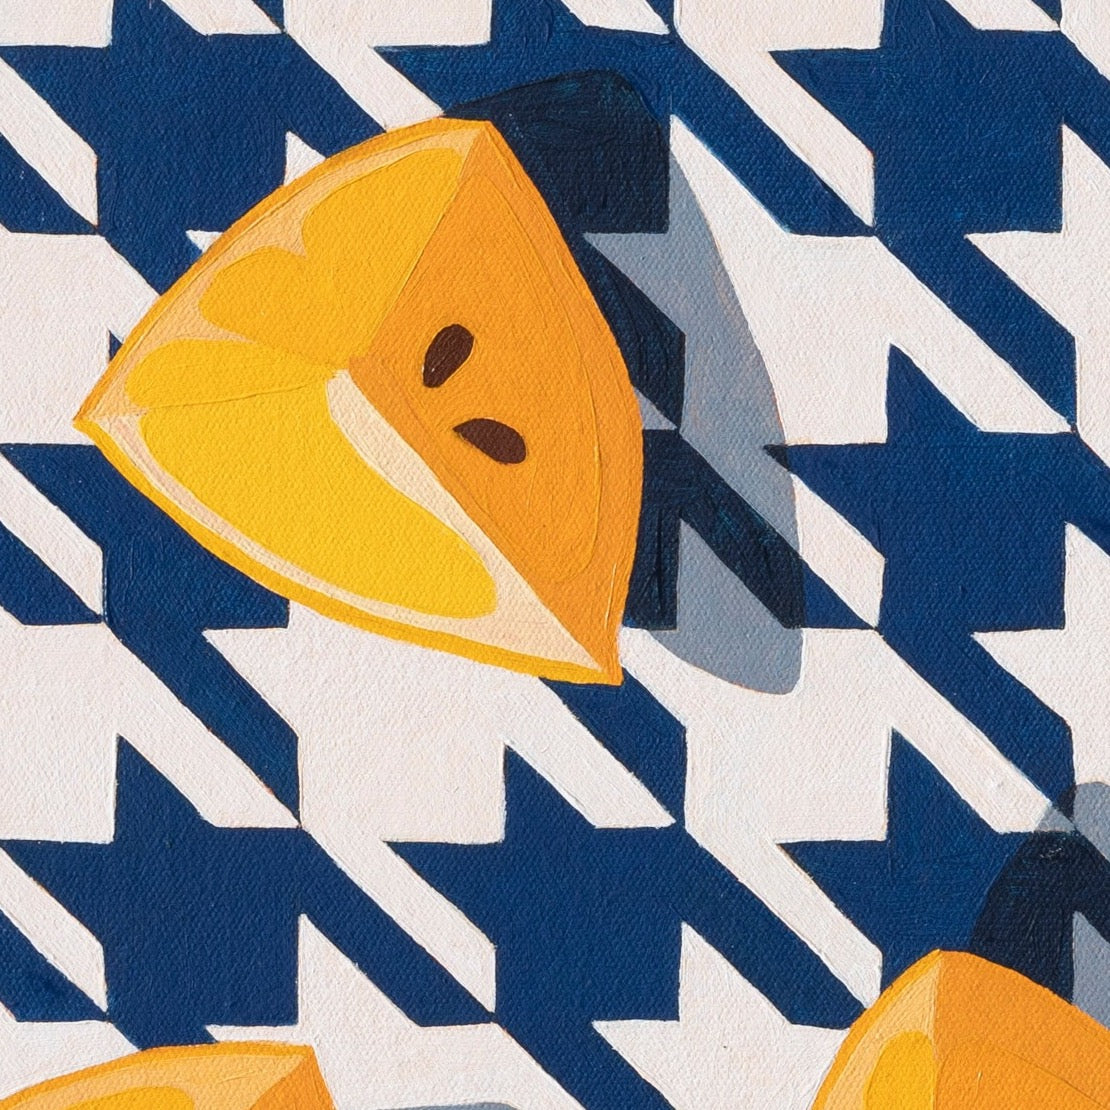 closeup of an original oil painting of three wedges of yellow lemons on a navy blue and white houndstooth background with blue-grey shadows